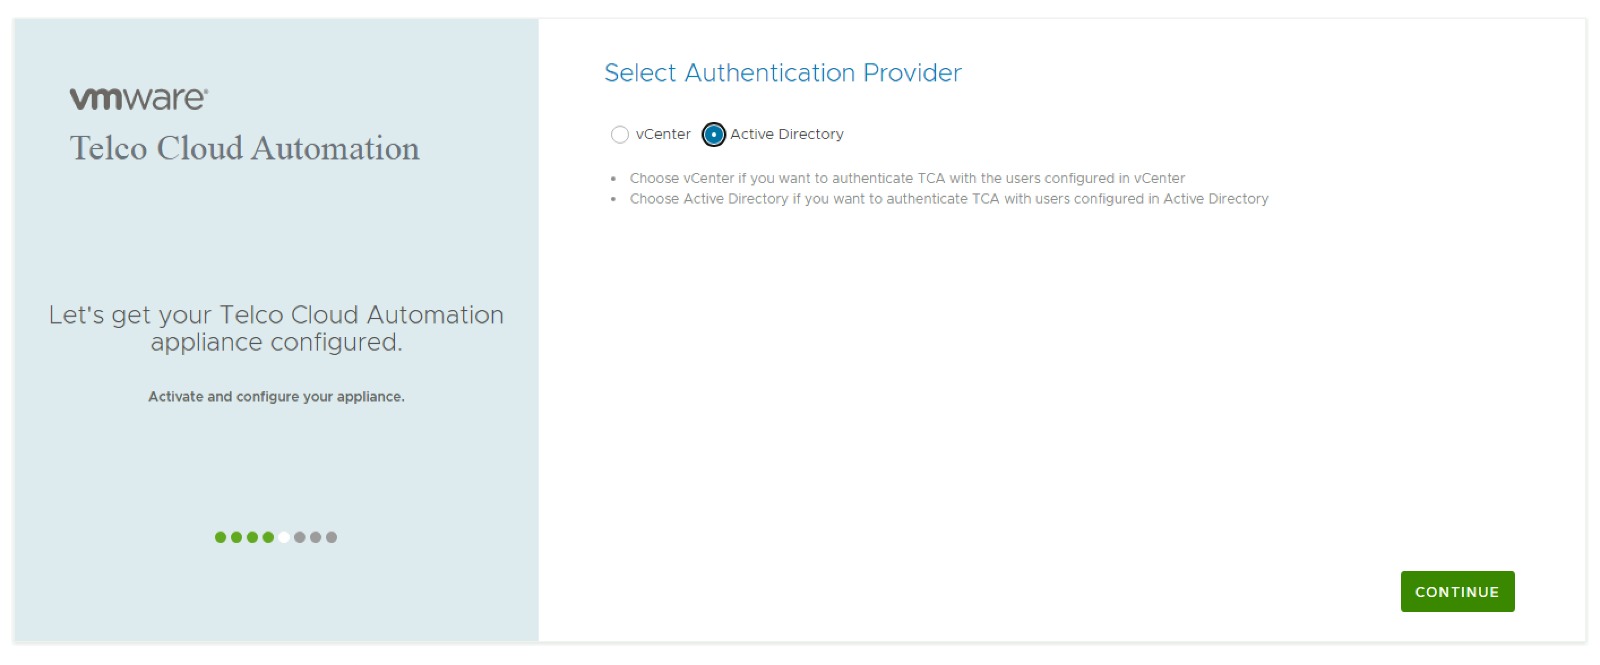 Authentication Provider Selection